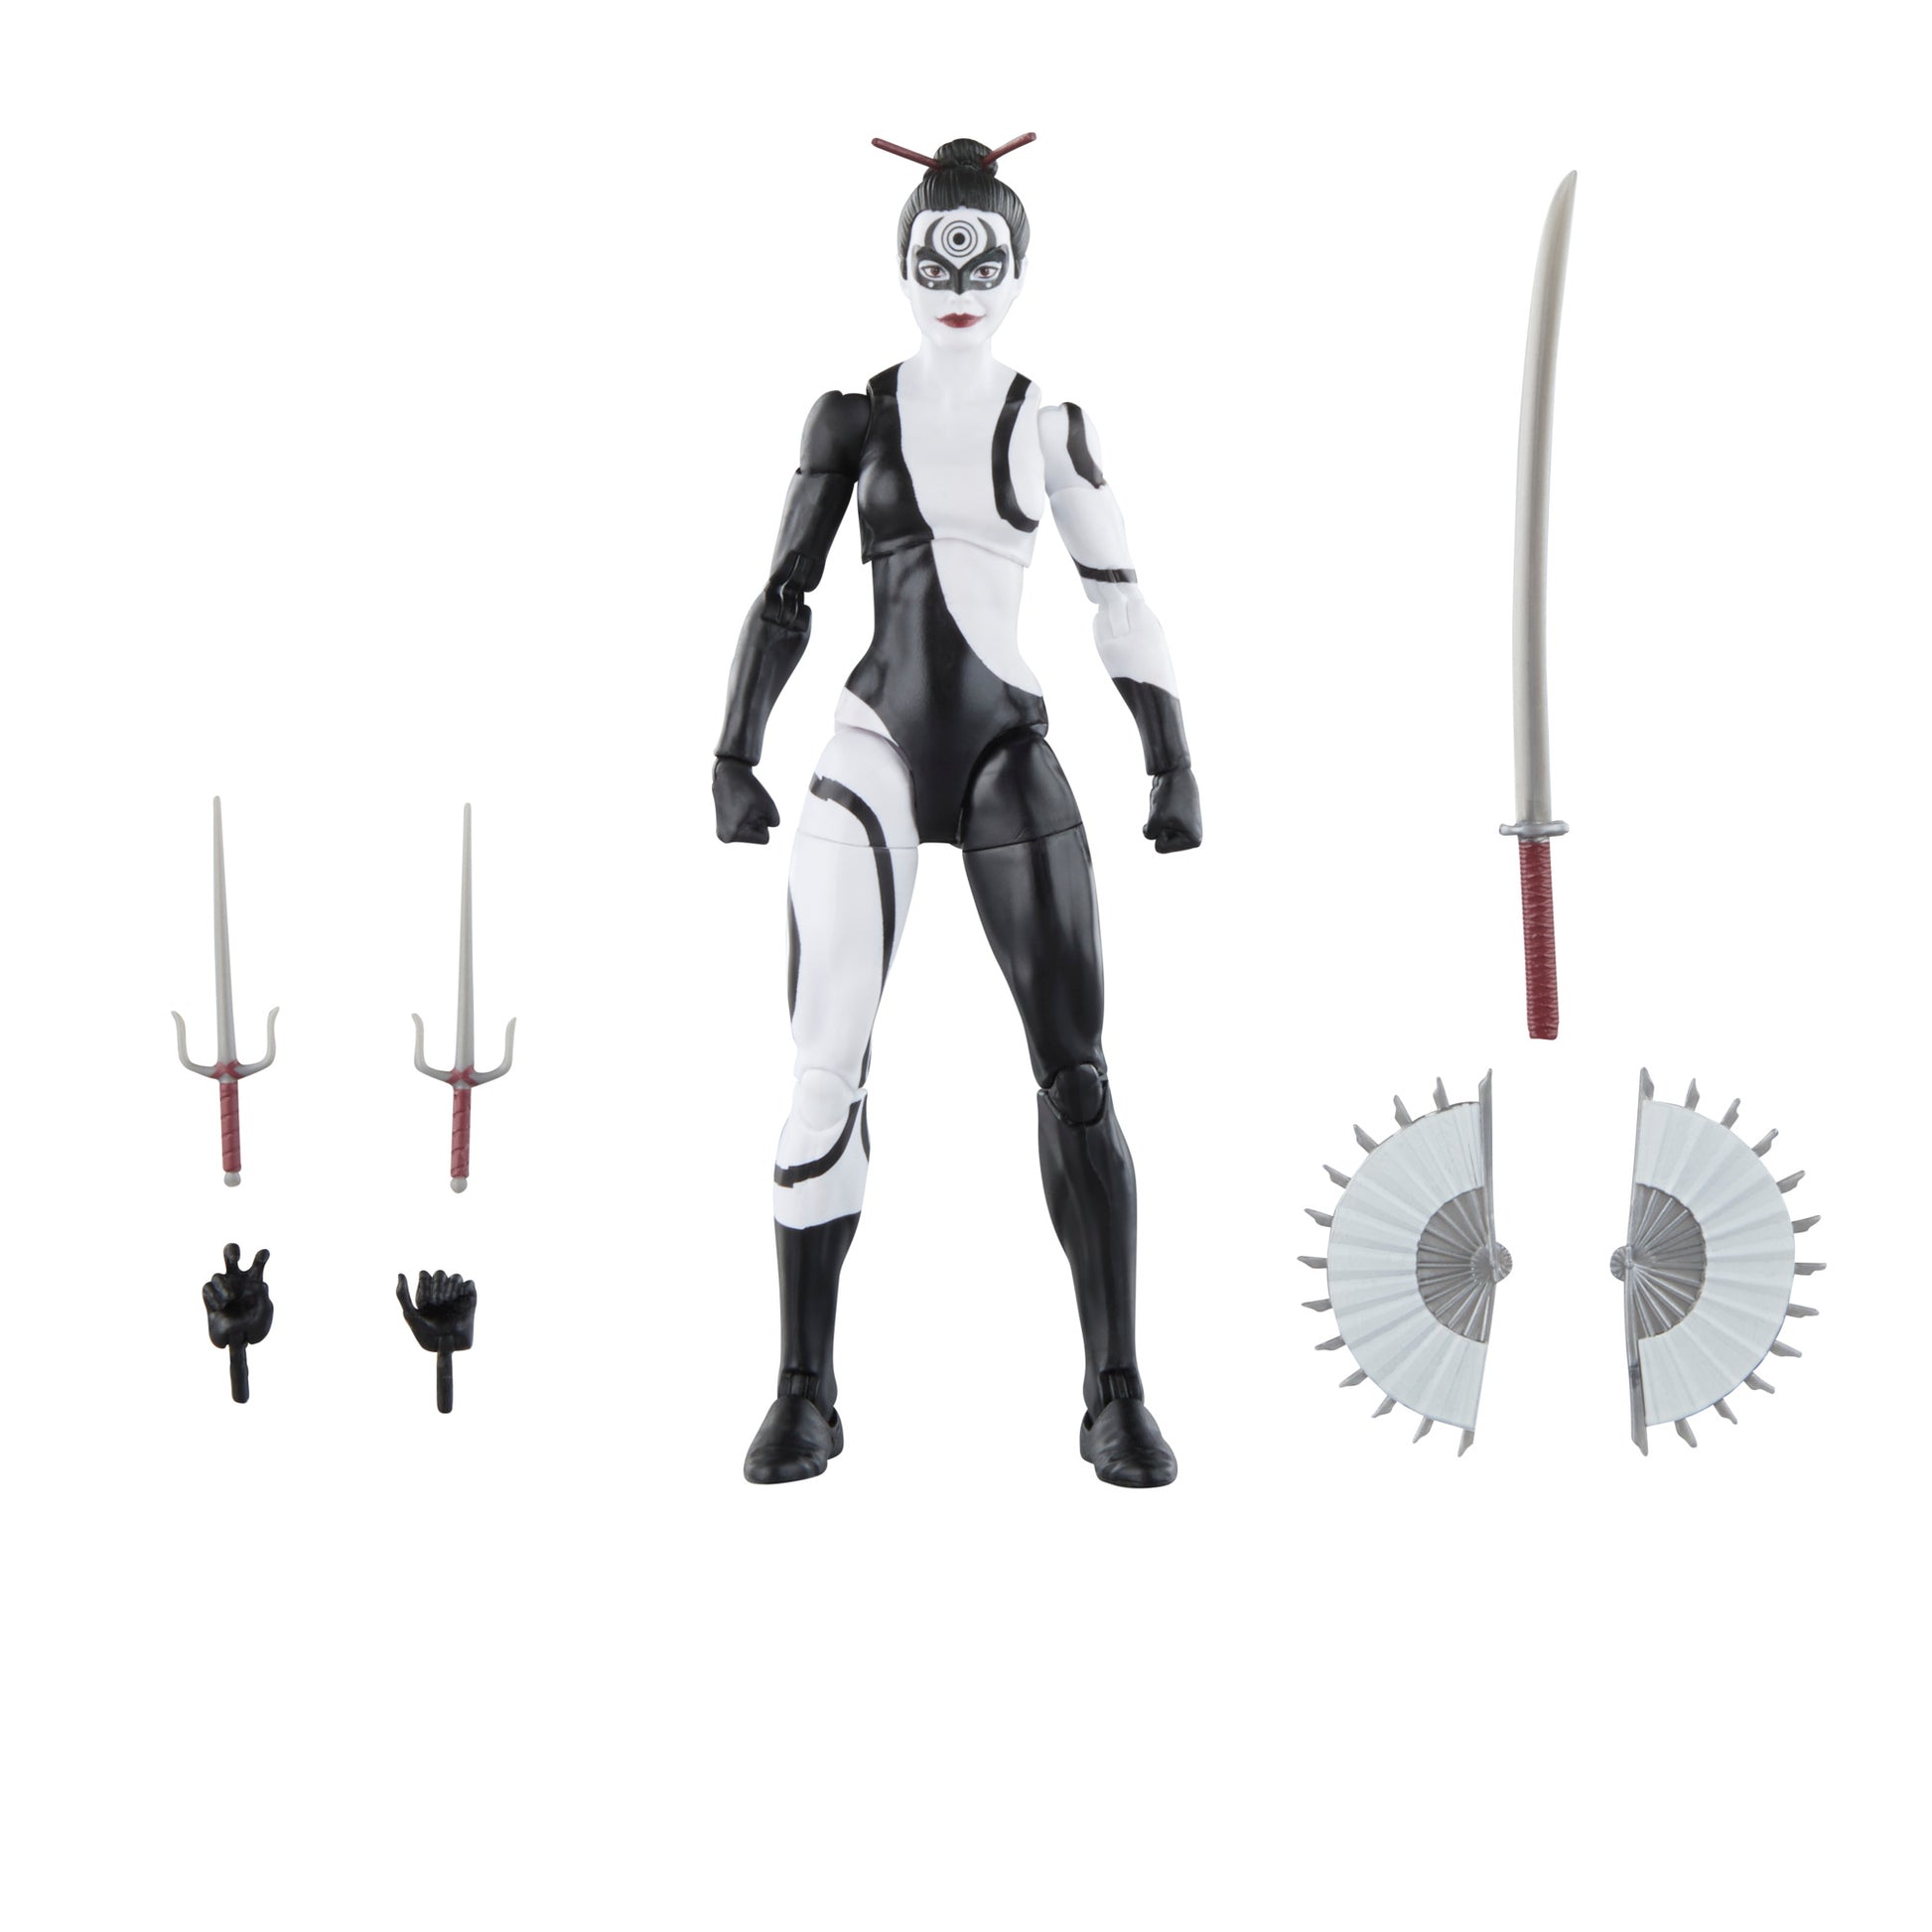 Hasbro Marvel Legends Series Marvel's Lady Bullseye Action Figure Toy with all accessories - Heretoserveyou